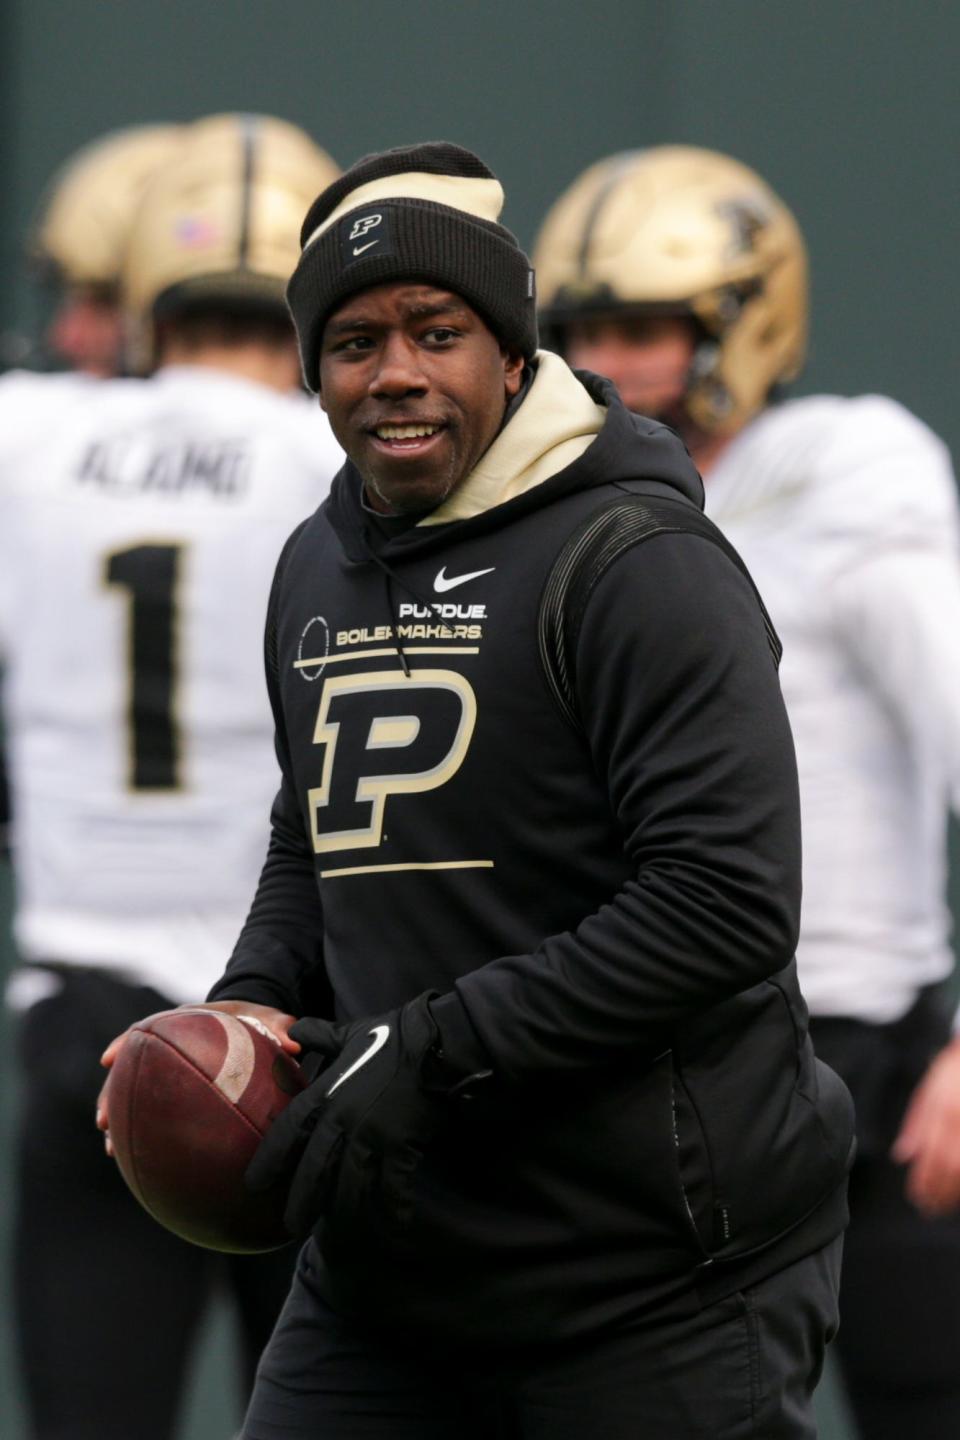 Purdue assistant coach JaMarcus Shephard prior to the start of an NCAA football game between the Purdue Boilermakers and the Northwestern Wildcats, Saturday, Nov. 20, 2021 in Chicago.